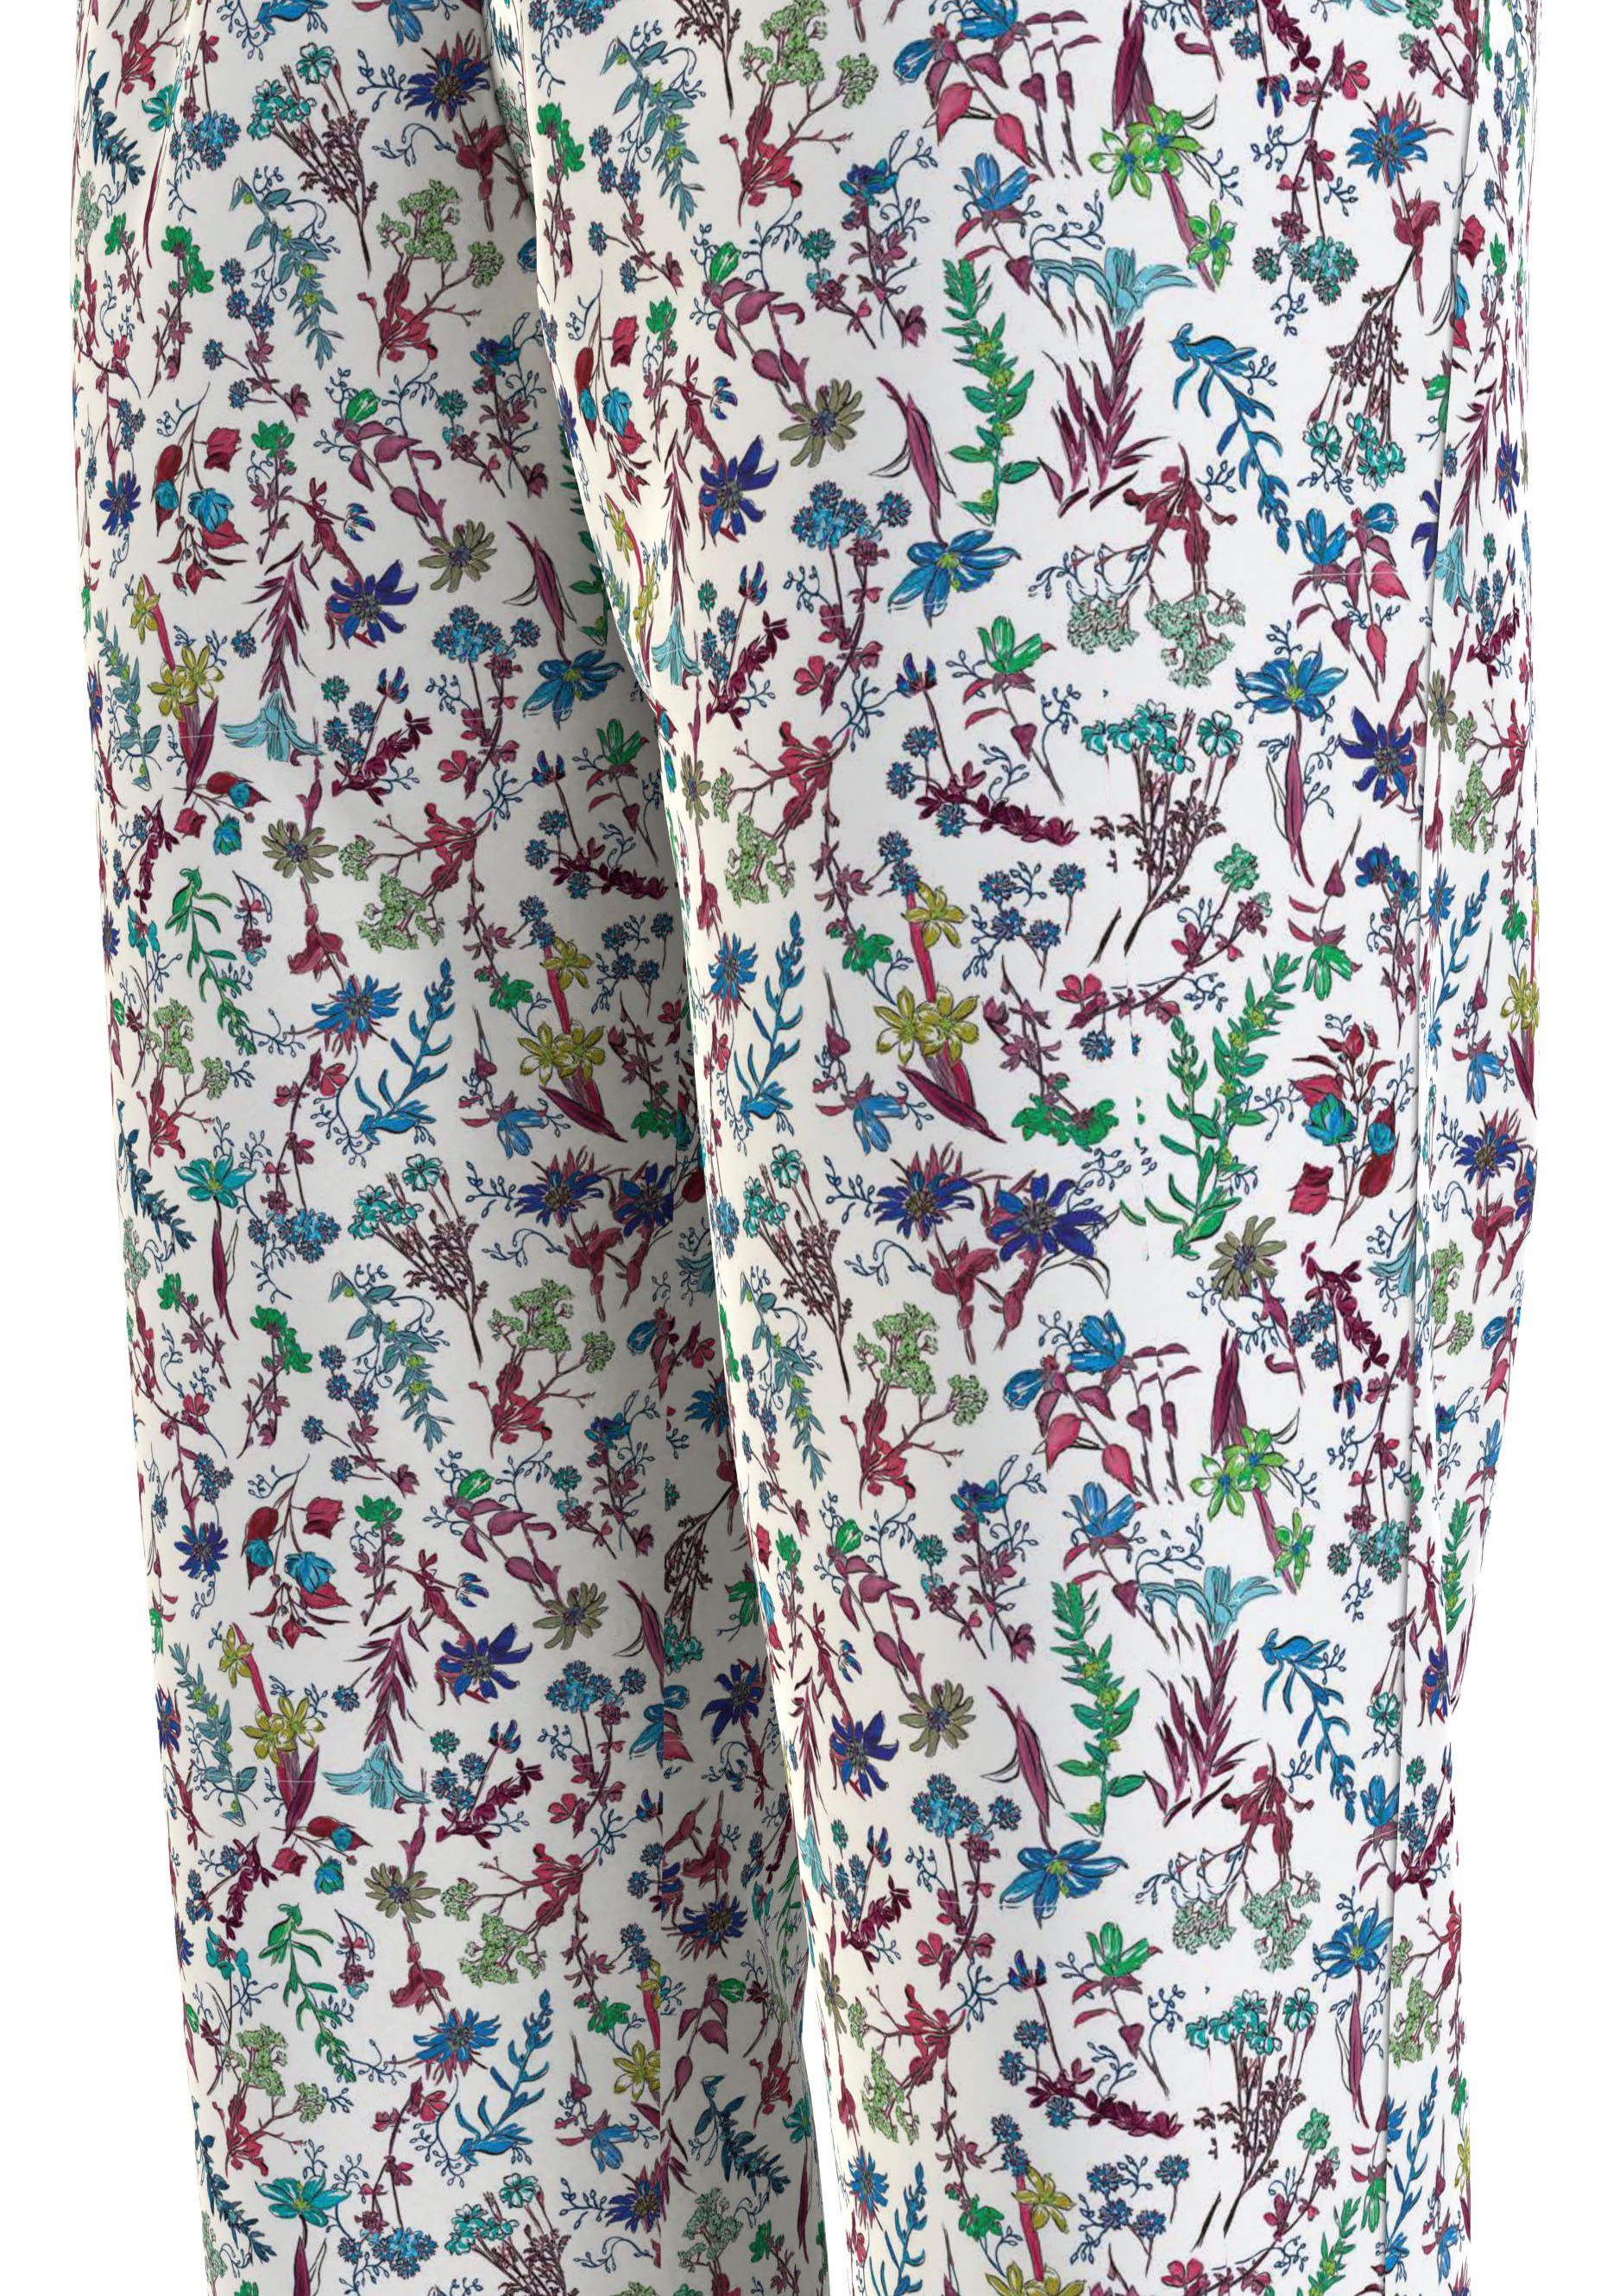 Underwear WOVEN Tommy Schlafhose TH PANTS in floralem Muster farbefrohem Hilfiger